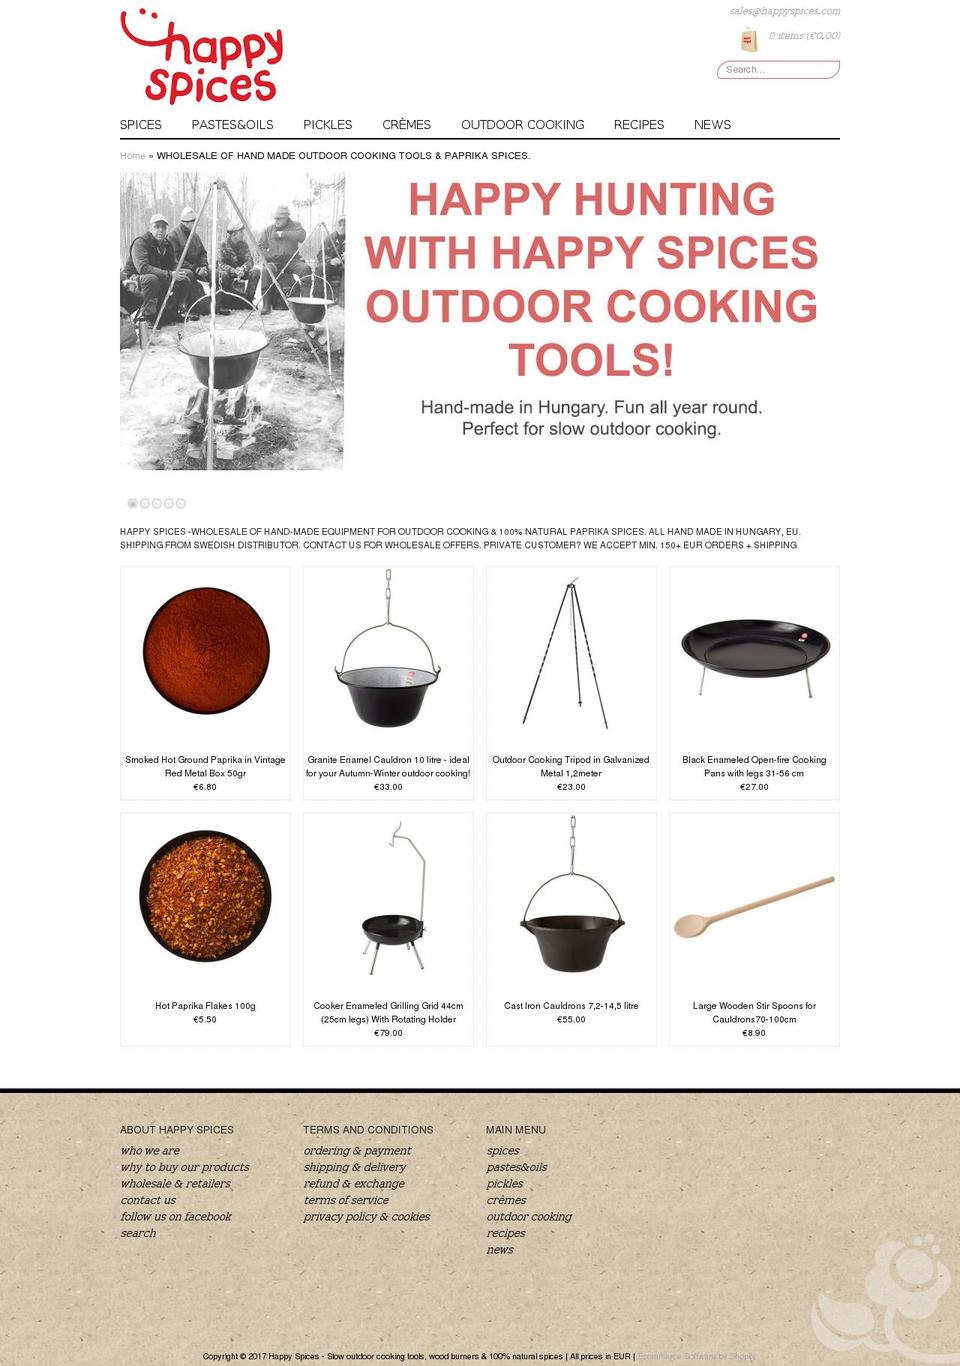 Couture Shopify theme site example happyspices.com